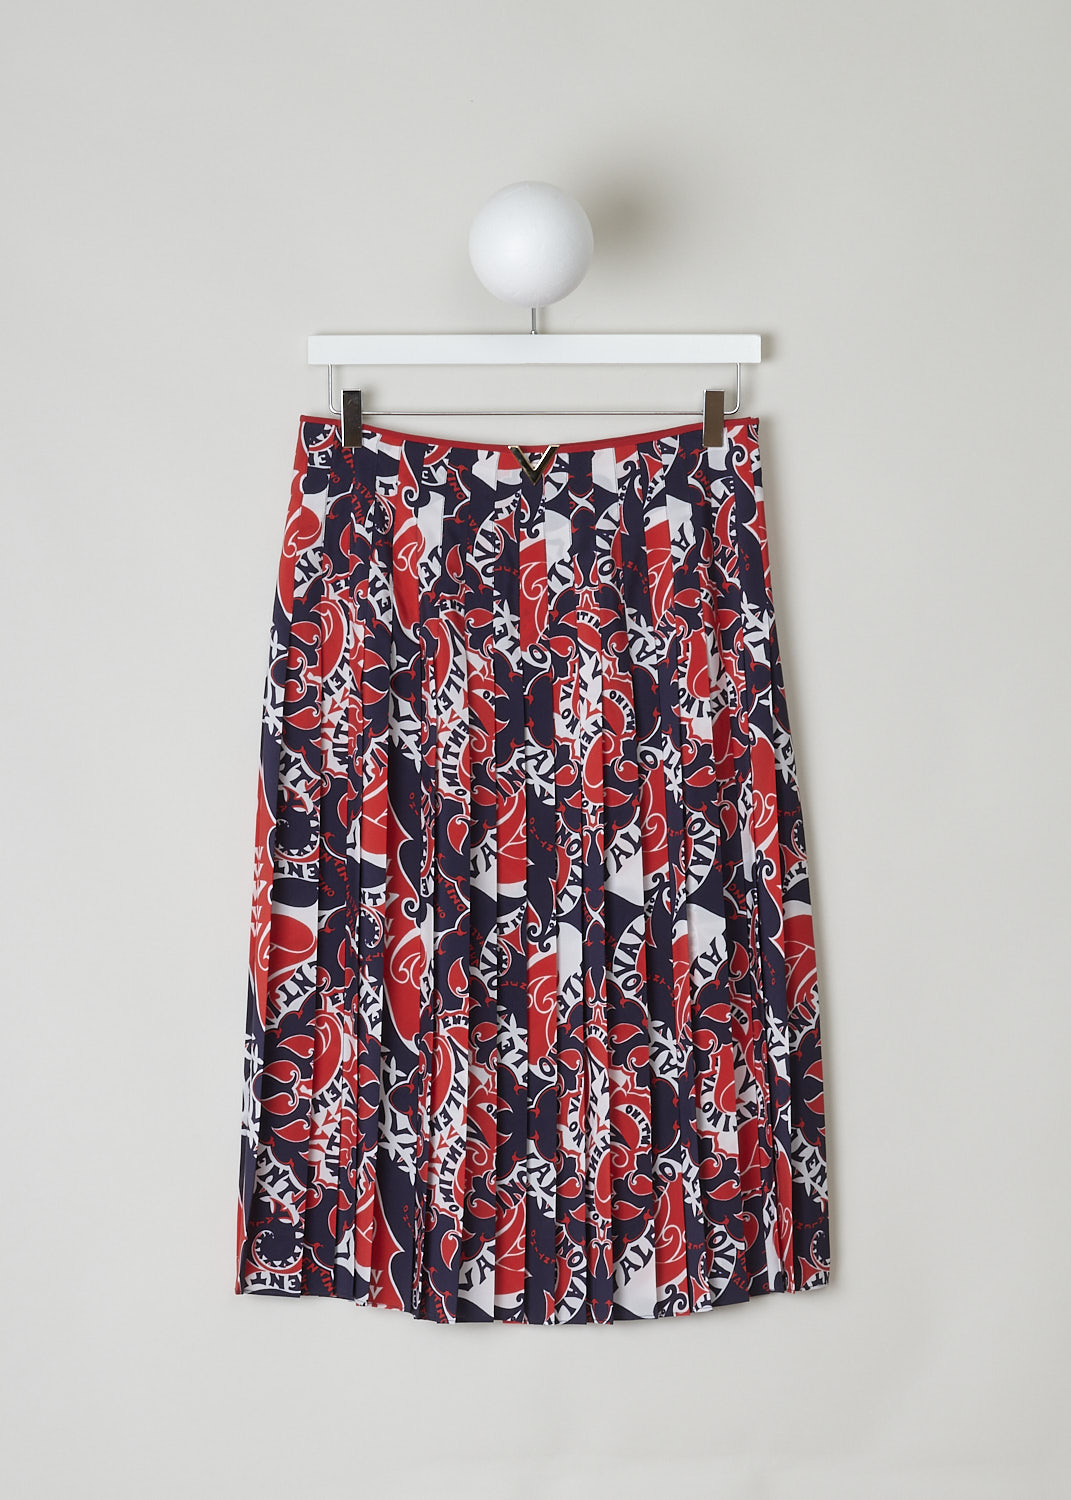 VALENTINO, BOLD PRINTED PLEATED SKIRT WITH GOLDEN V, 1B3RA8Y57AP_01N, Print, Blue, Red, Front, This bold printed midi skirt has the brand's signature gold-toned V-logo on the waistline. The skirt is fully pleated. The closure option on this skirt is a concealed zipper in the side seam.
